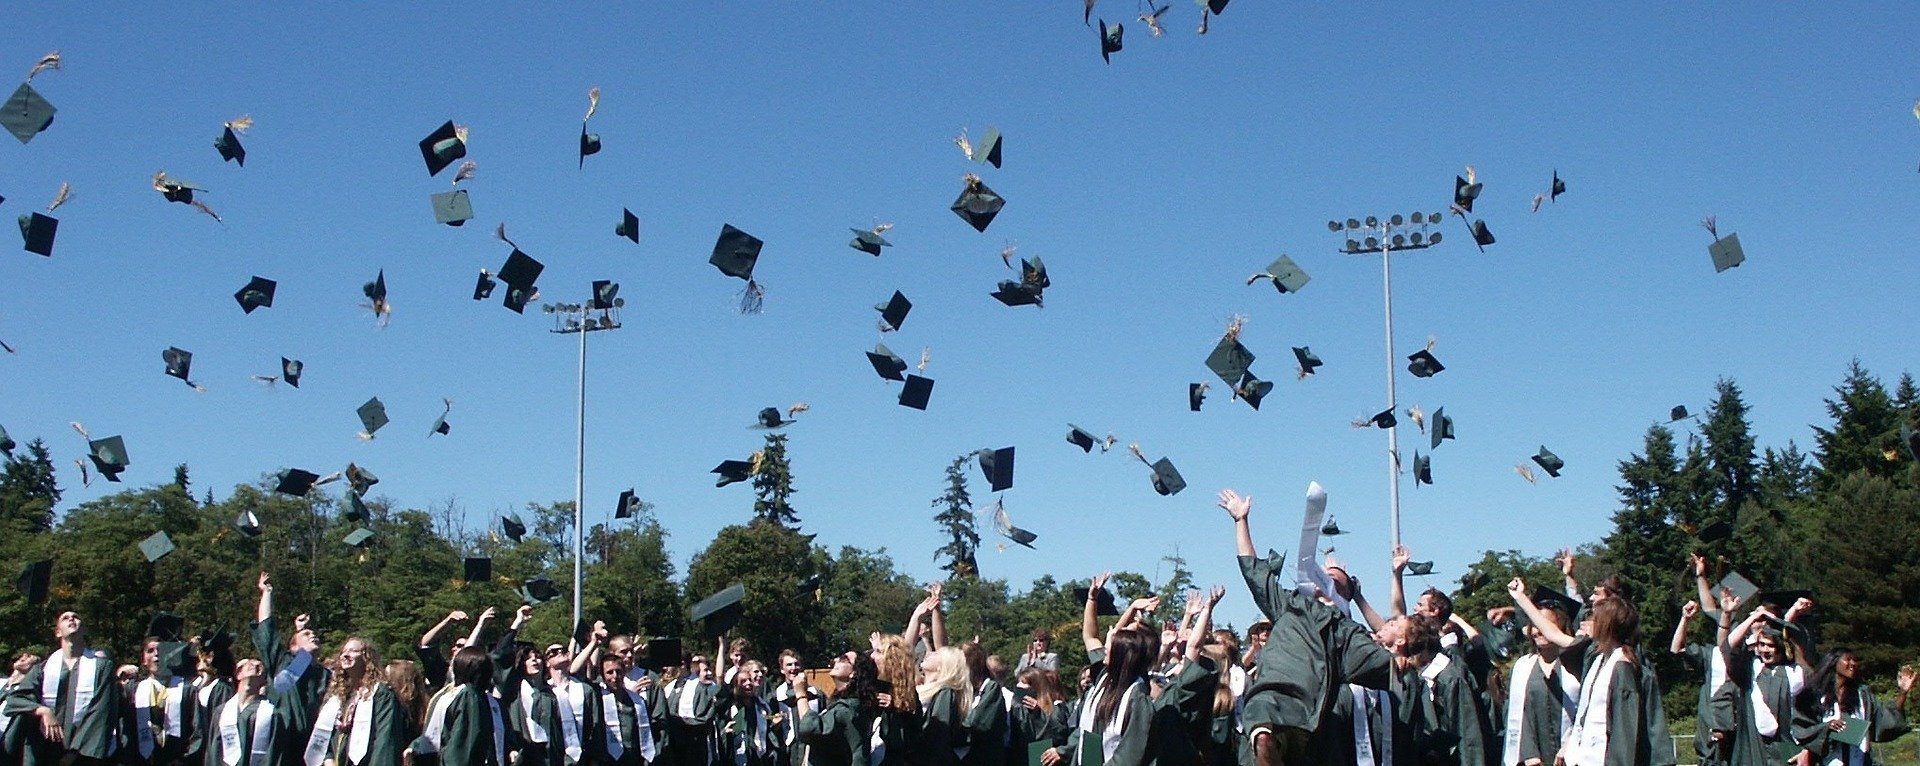 A bunch of high school graduates throws their graduation caps up in the air while celebrating outdoors | Photo: Pixabay/Gillian Callison